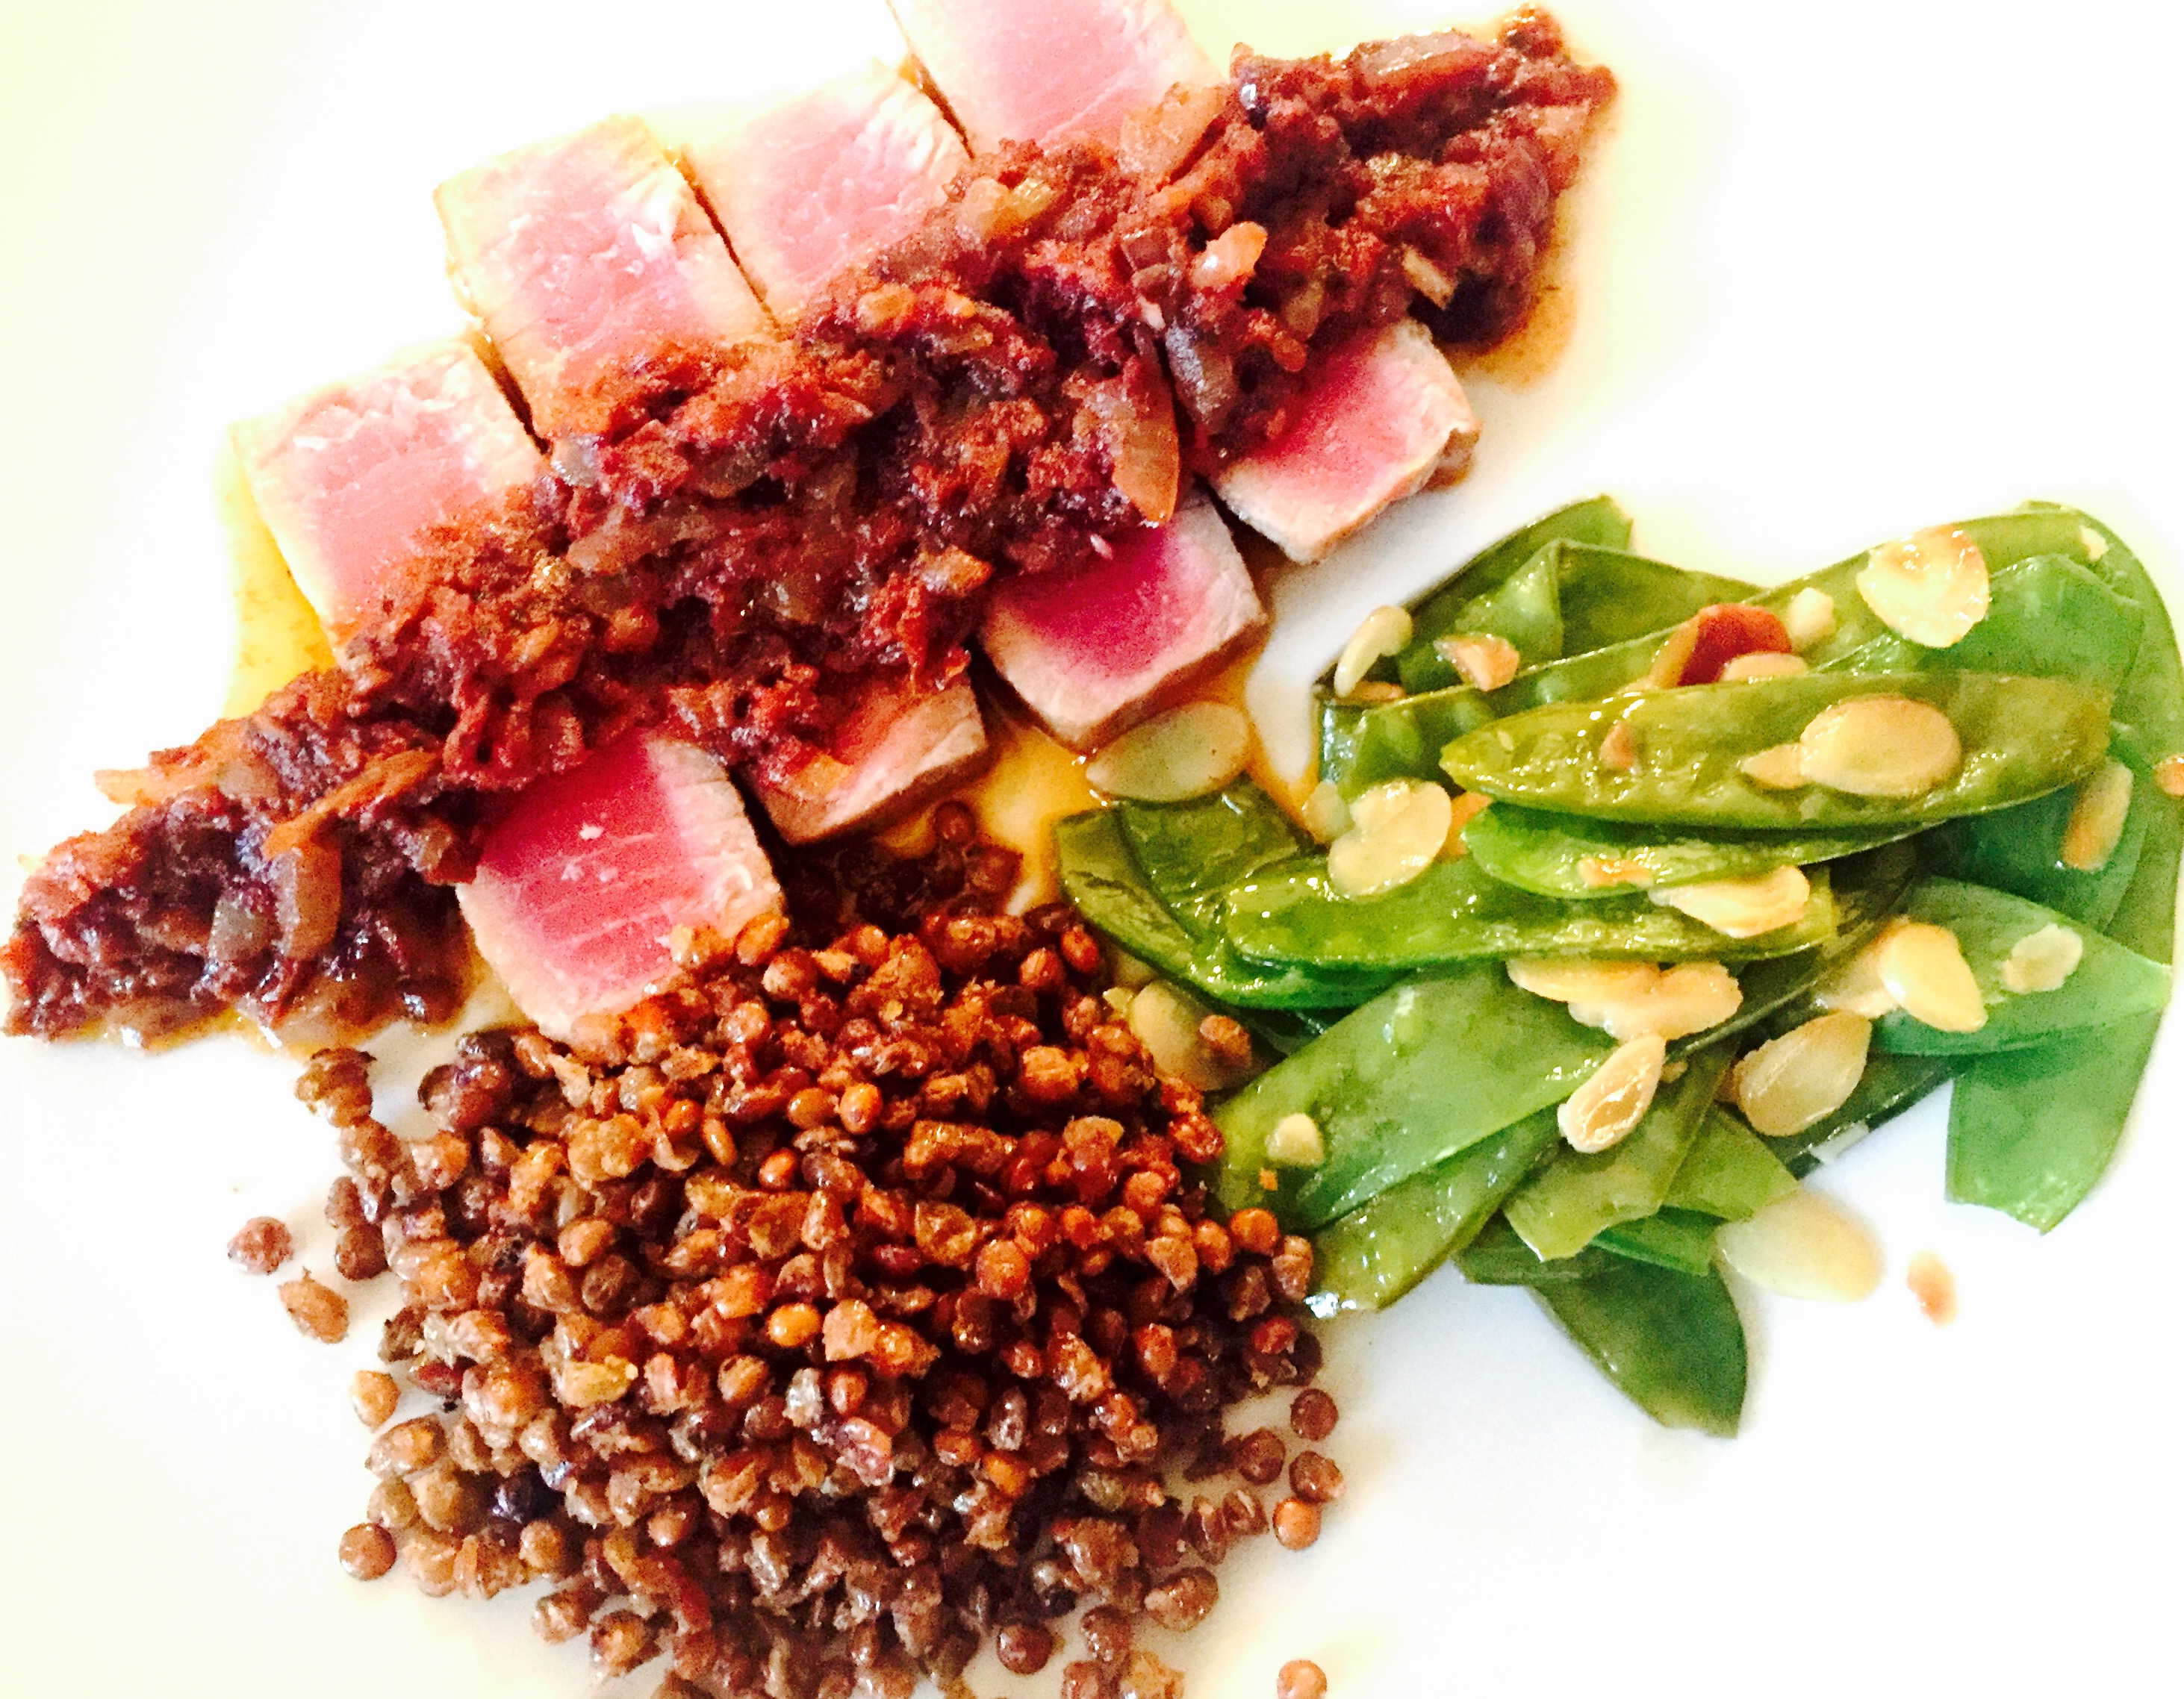 Seared tuna with a savoury sun-dried tomato reduction, some sliced almond snow peas and lovely roasted lentils